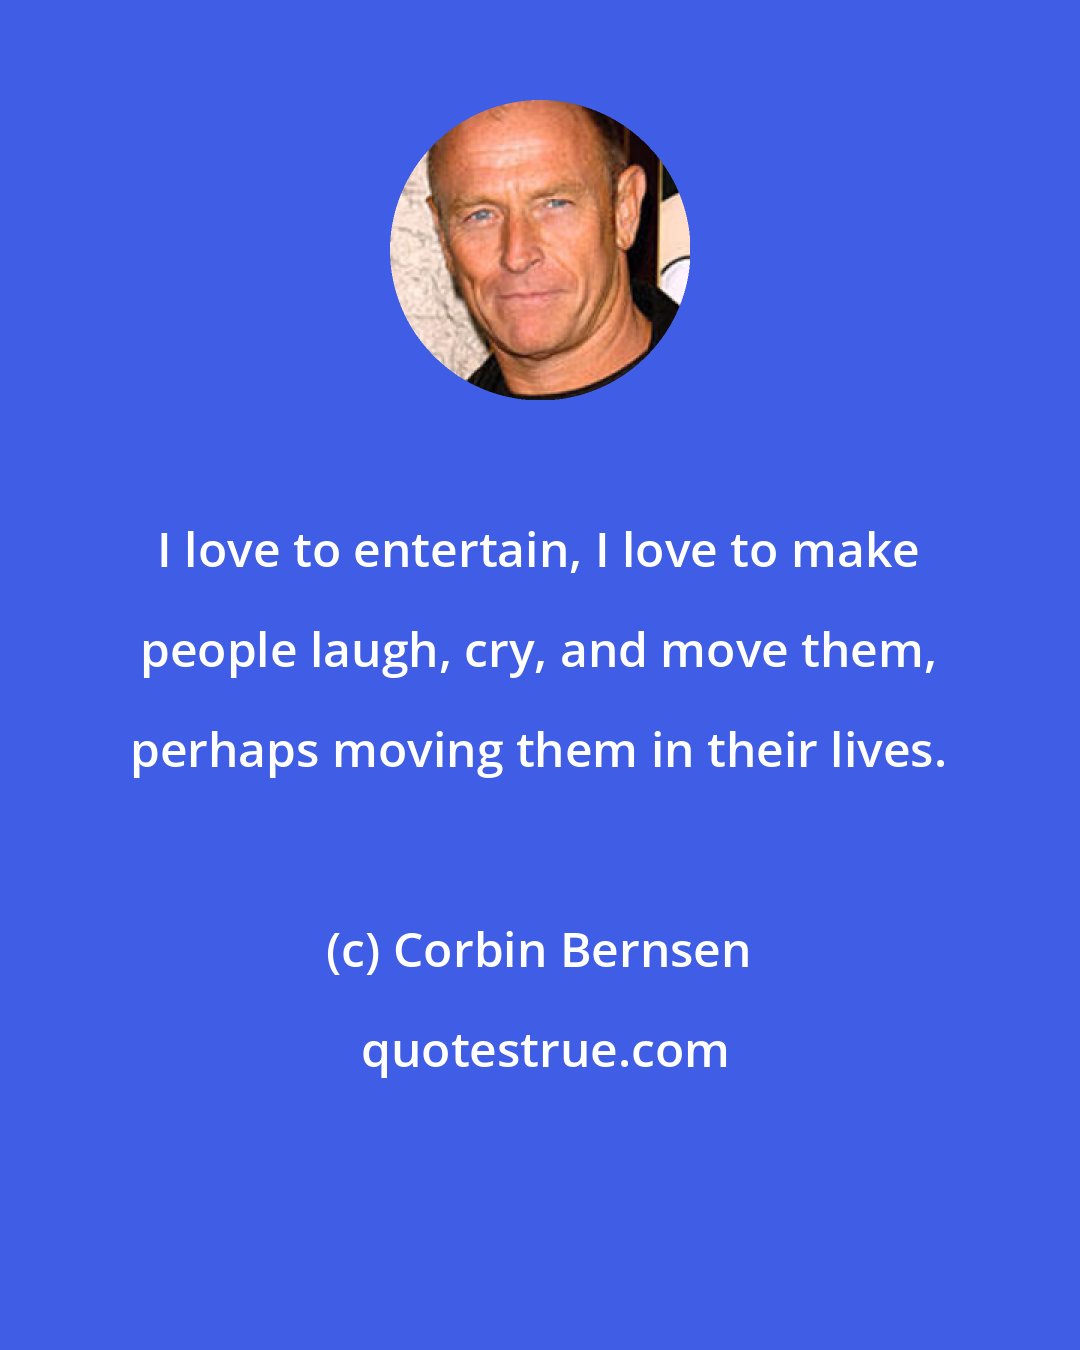 Corbin Bernsen: I love to entertain, I love to make people laugh, cry, and move them, perhaps moving them in their lives.